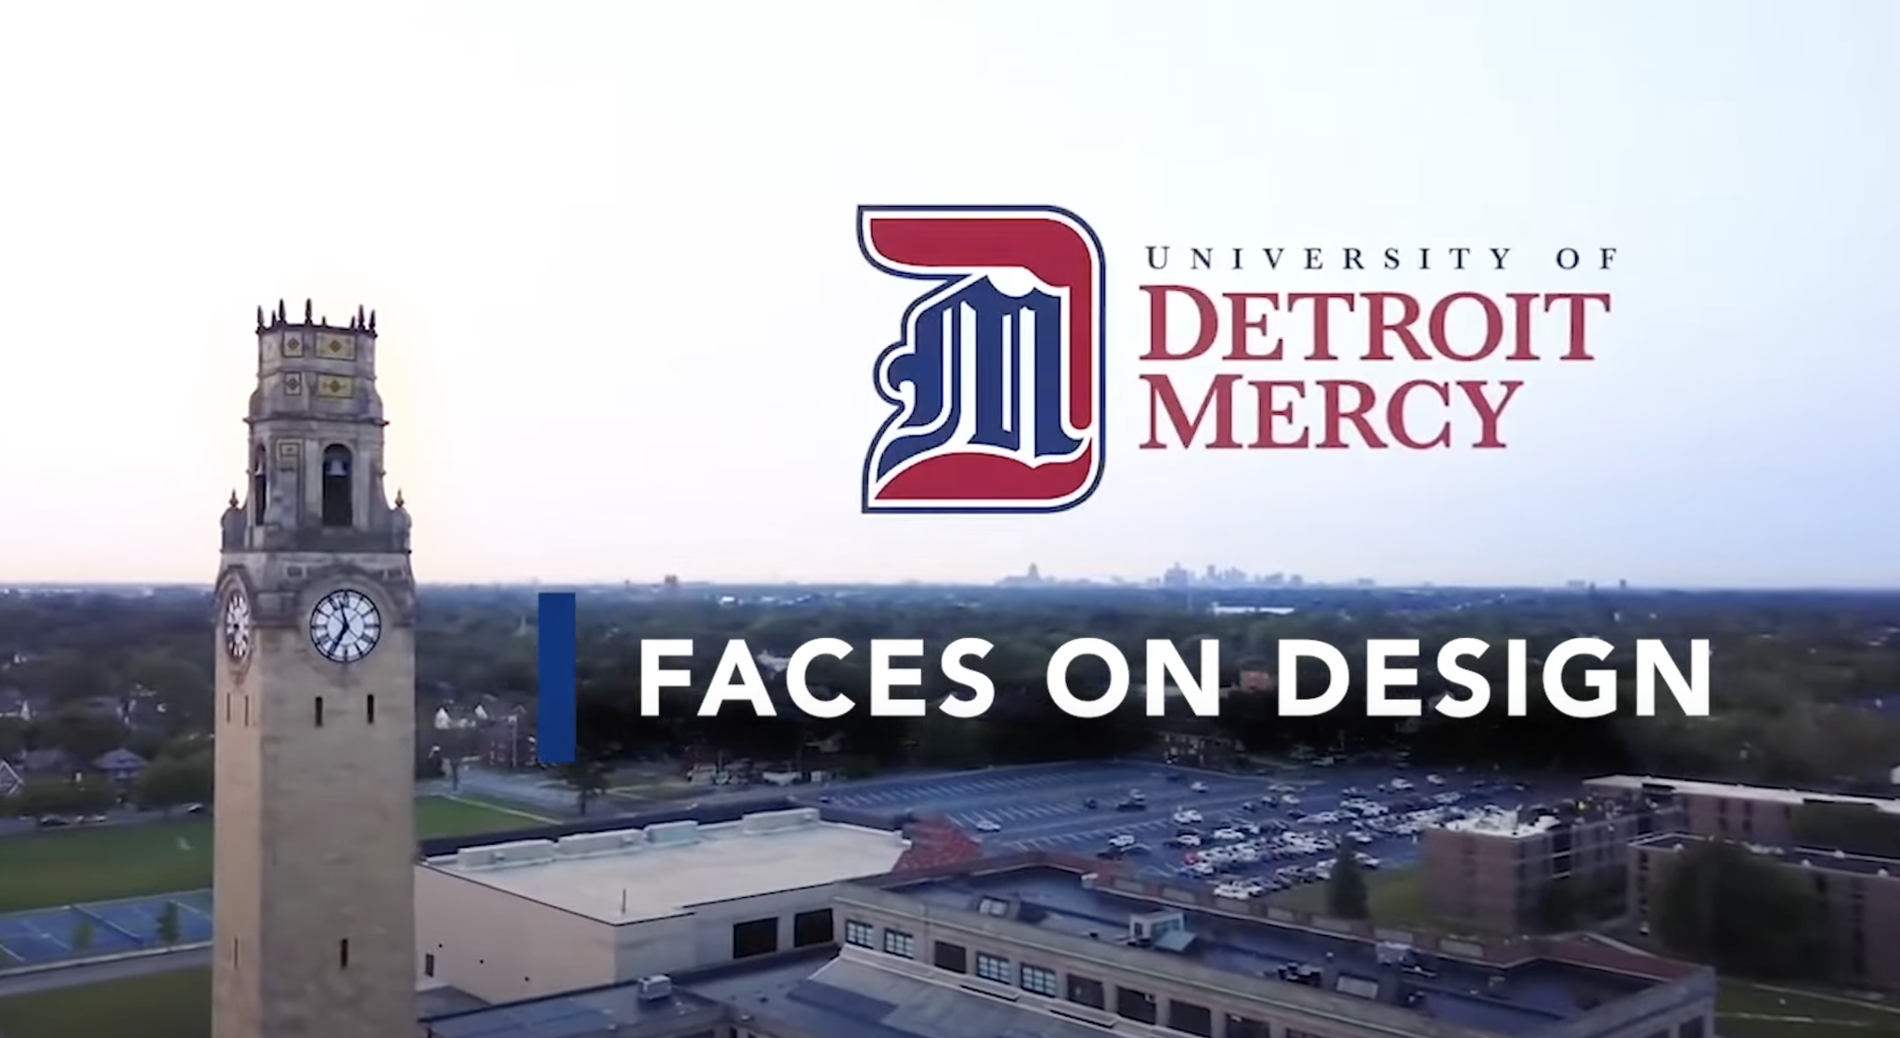 Detroit Mercy McNicholas Campus clocktower from the sky across the right side of the image is a digital banner that reads University of Detroit Mercy, Faces on Design